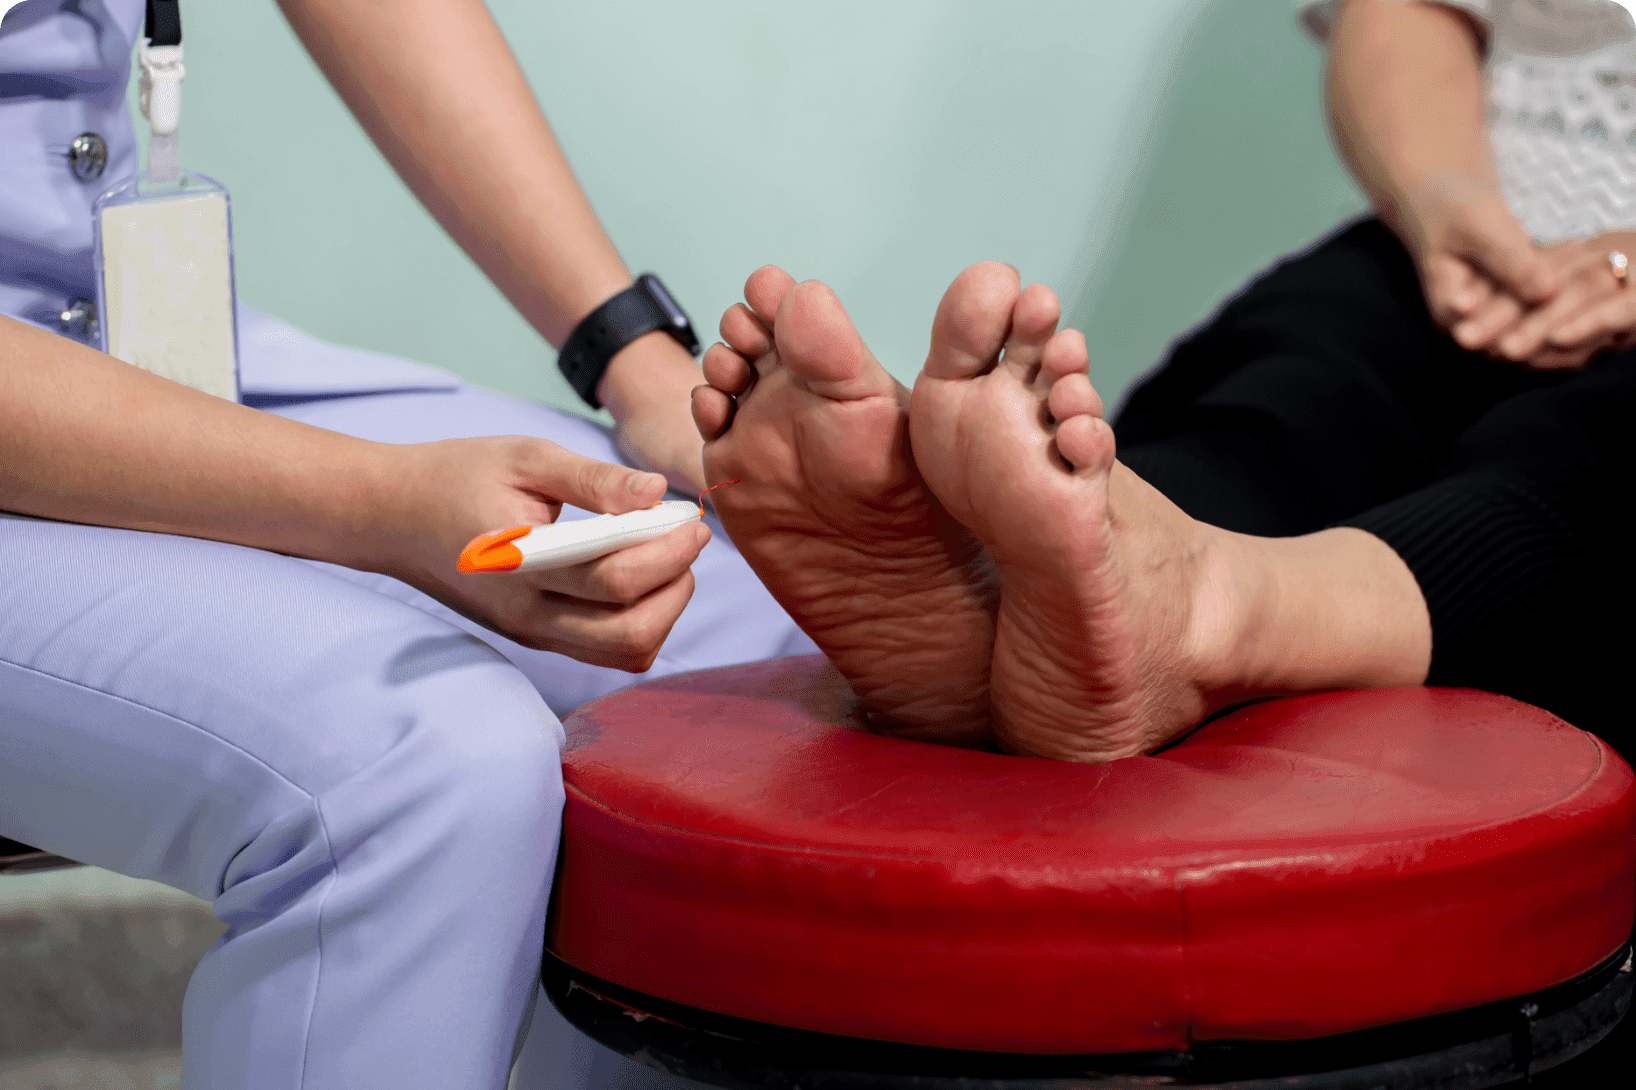 Foot Exam For People With Diabetes